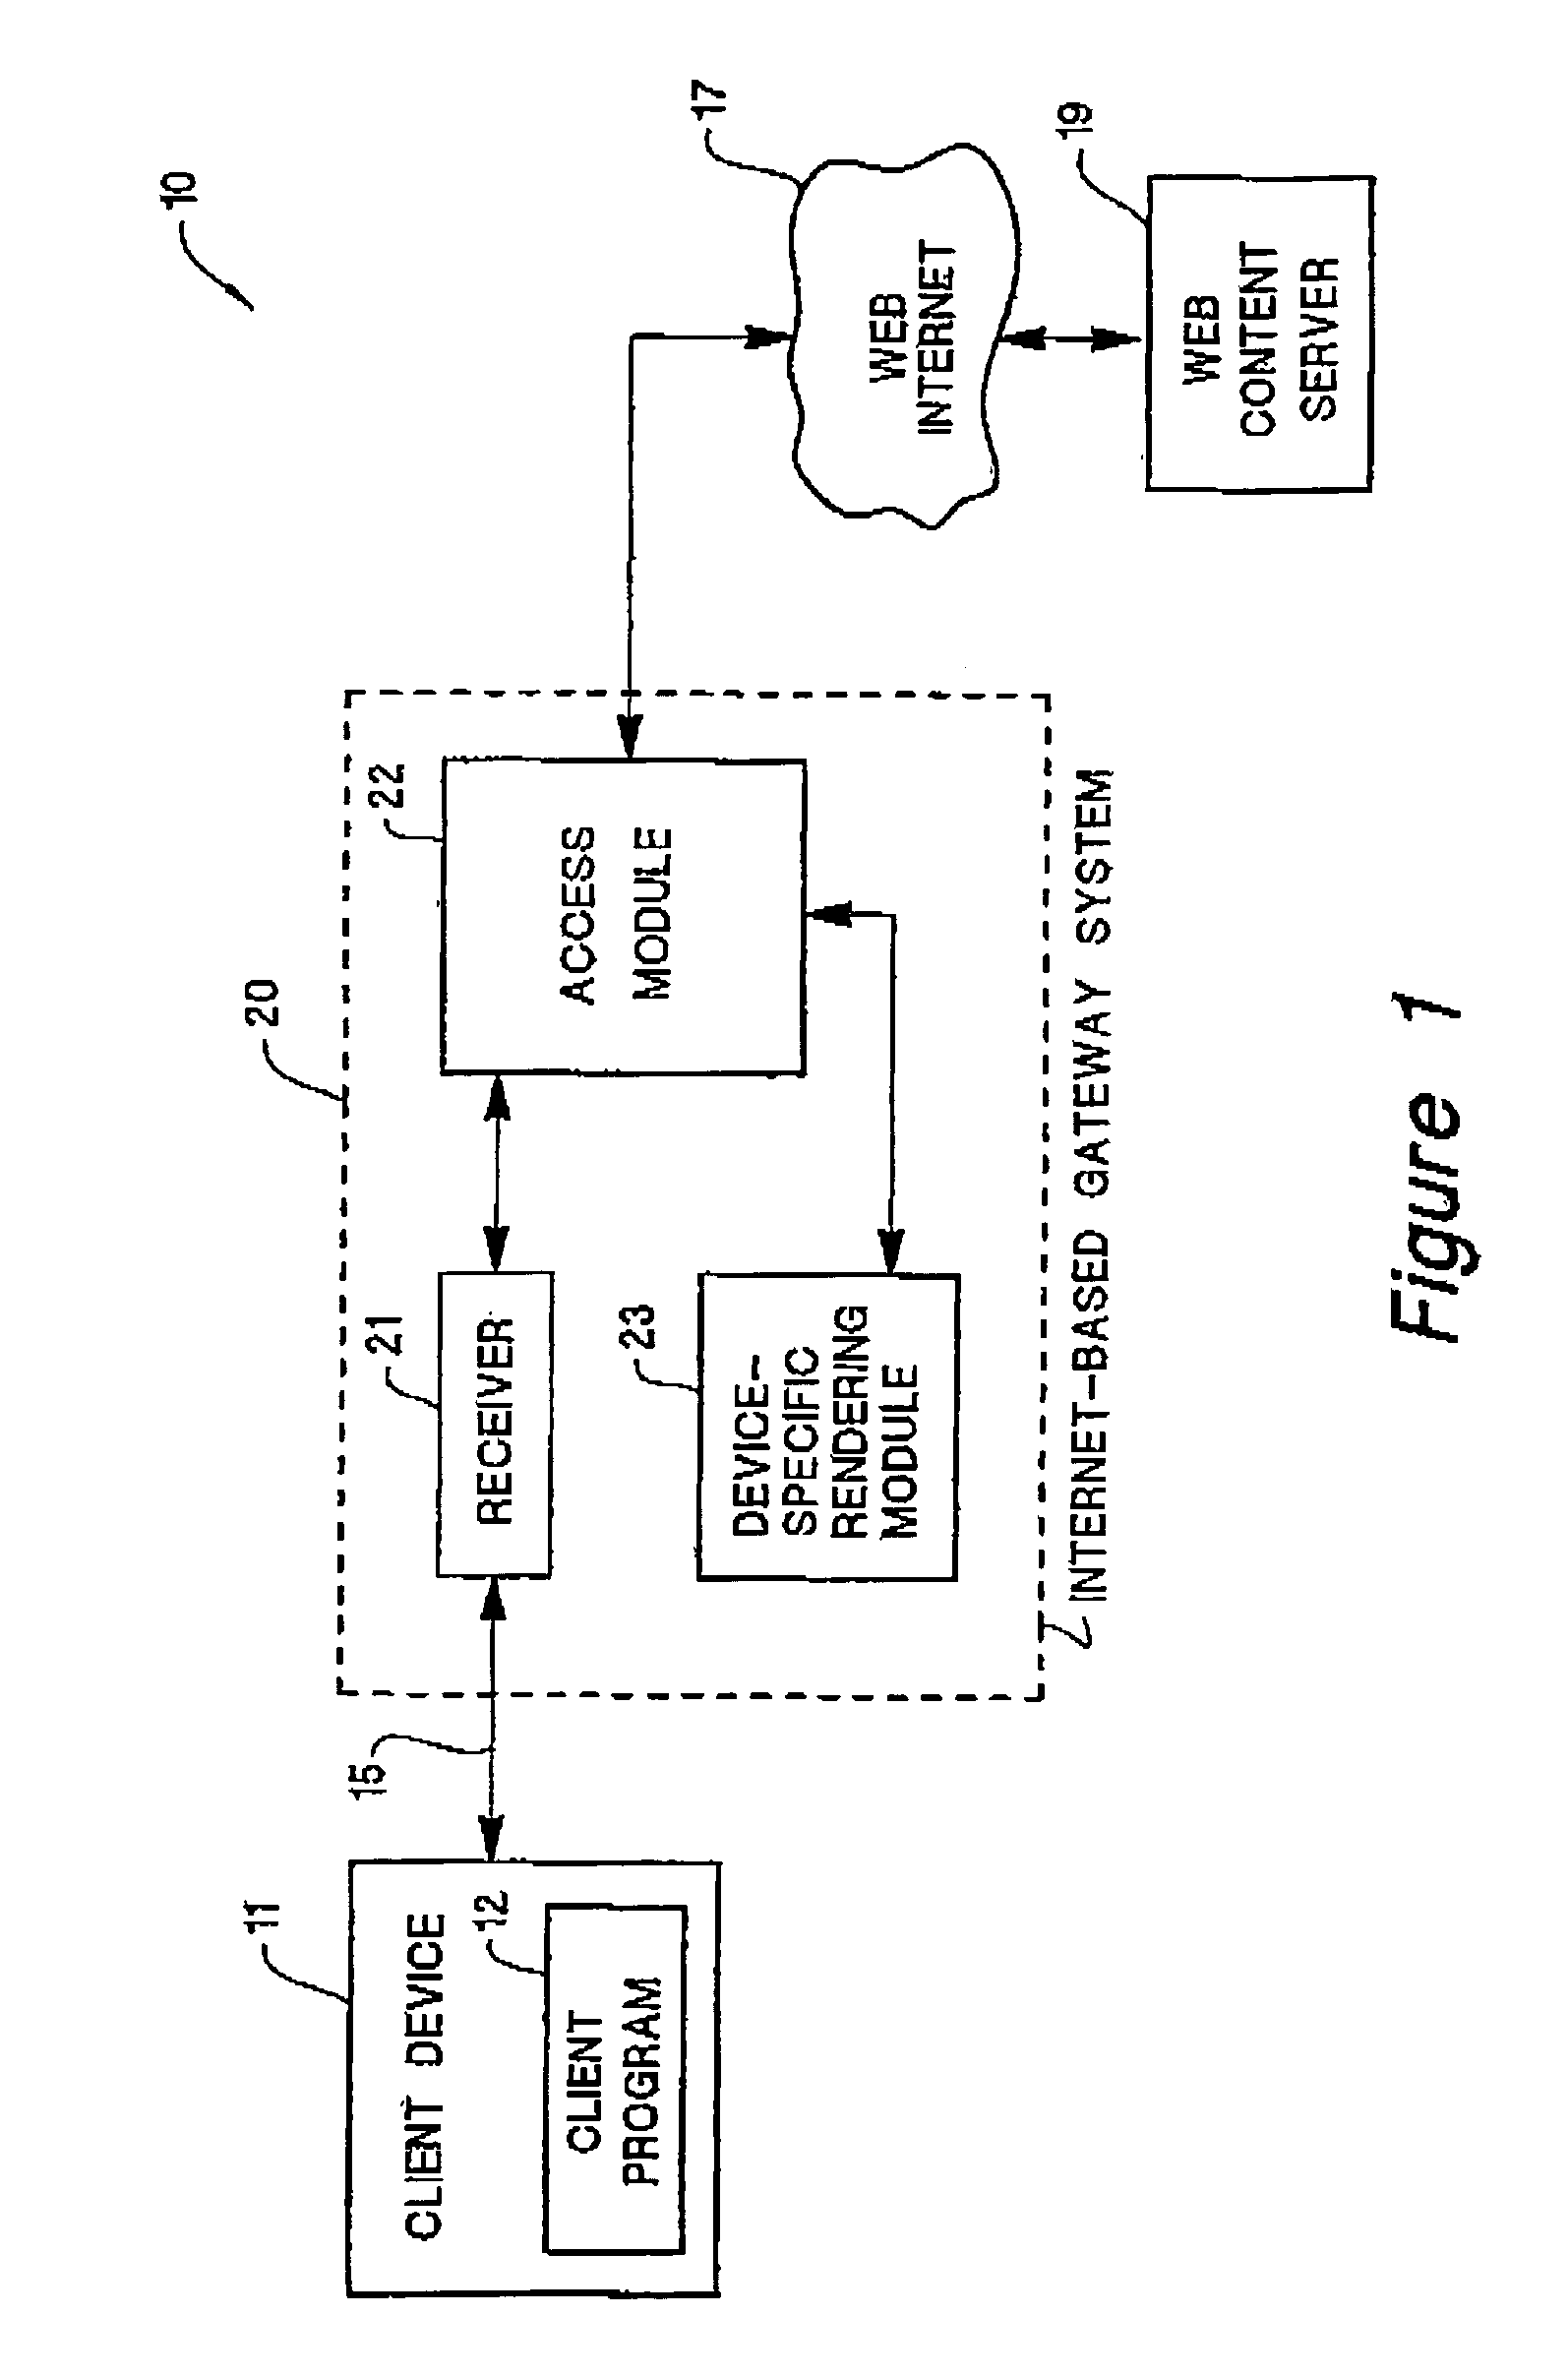 System for providing internet-related services in response to a handheld device that is not required to be internet-enabled